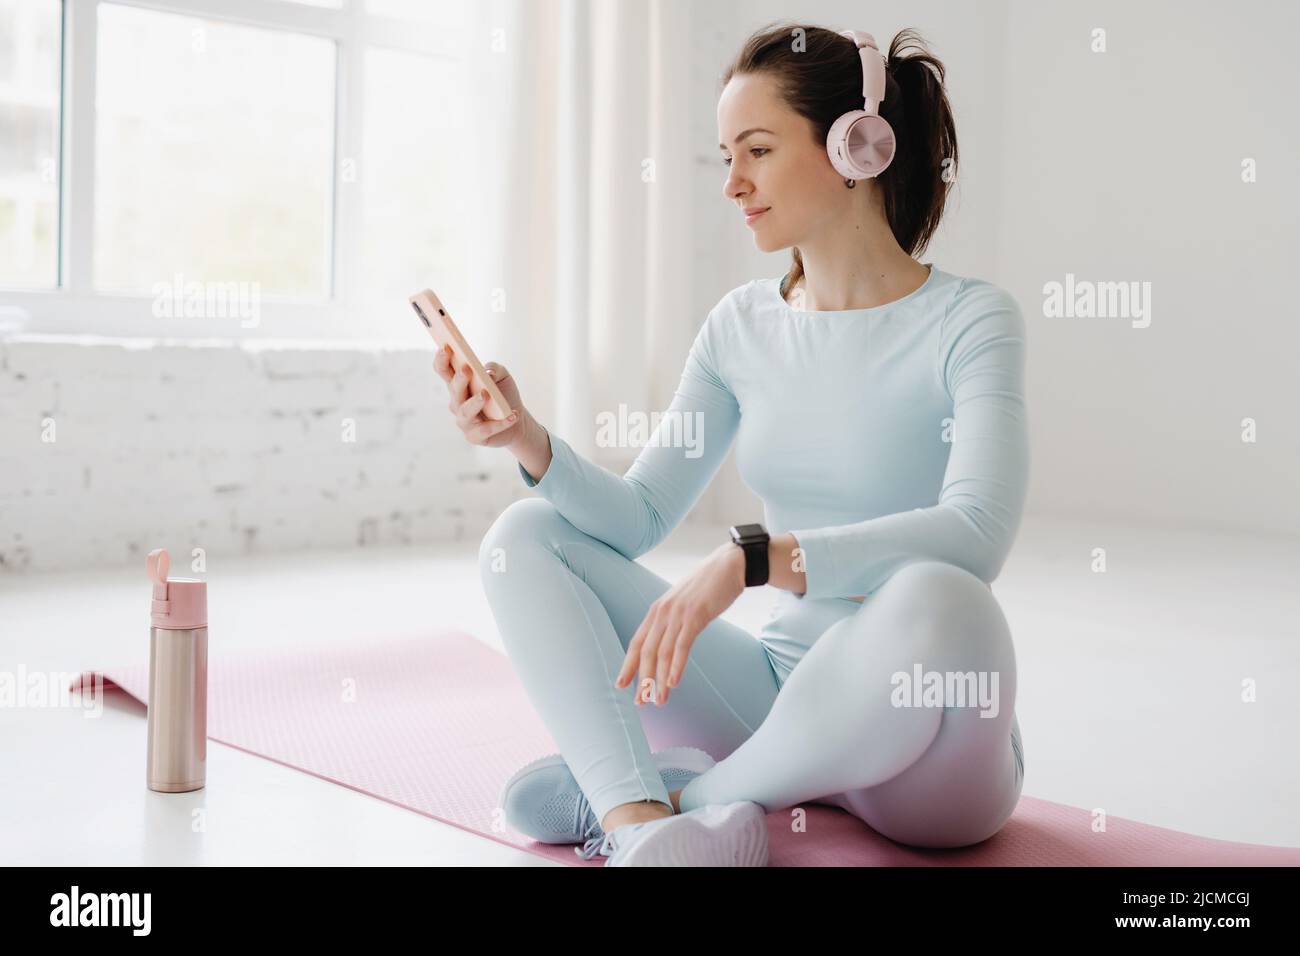 Sporty woman sitting on a yoga mat using smartphone and listening to music on headphones during training at gym. Stock Photo